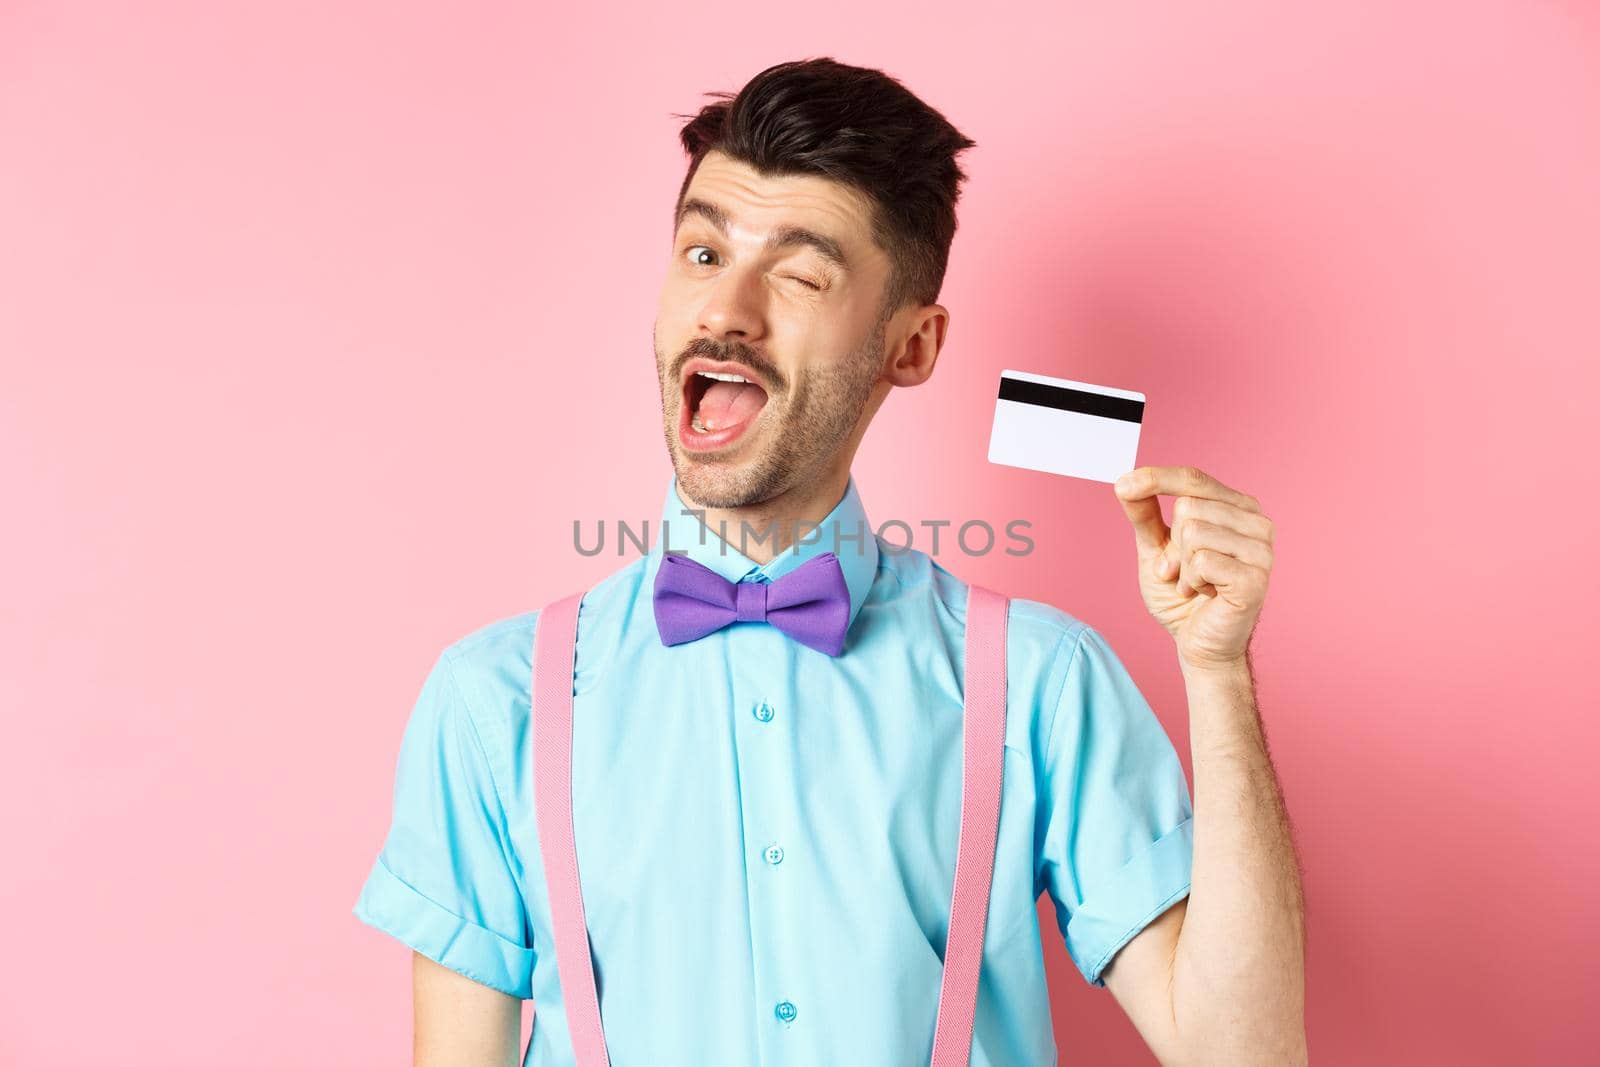 Shopping concept. Funny guy with moustache winking at camera, showing plastic credit card, recommending bank promo offer, standing on pink background.